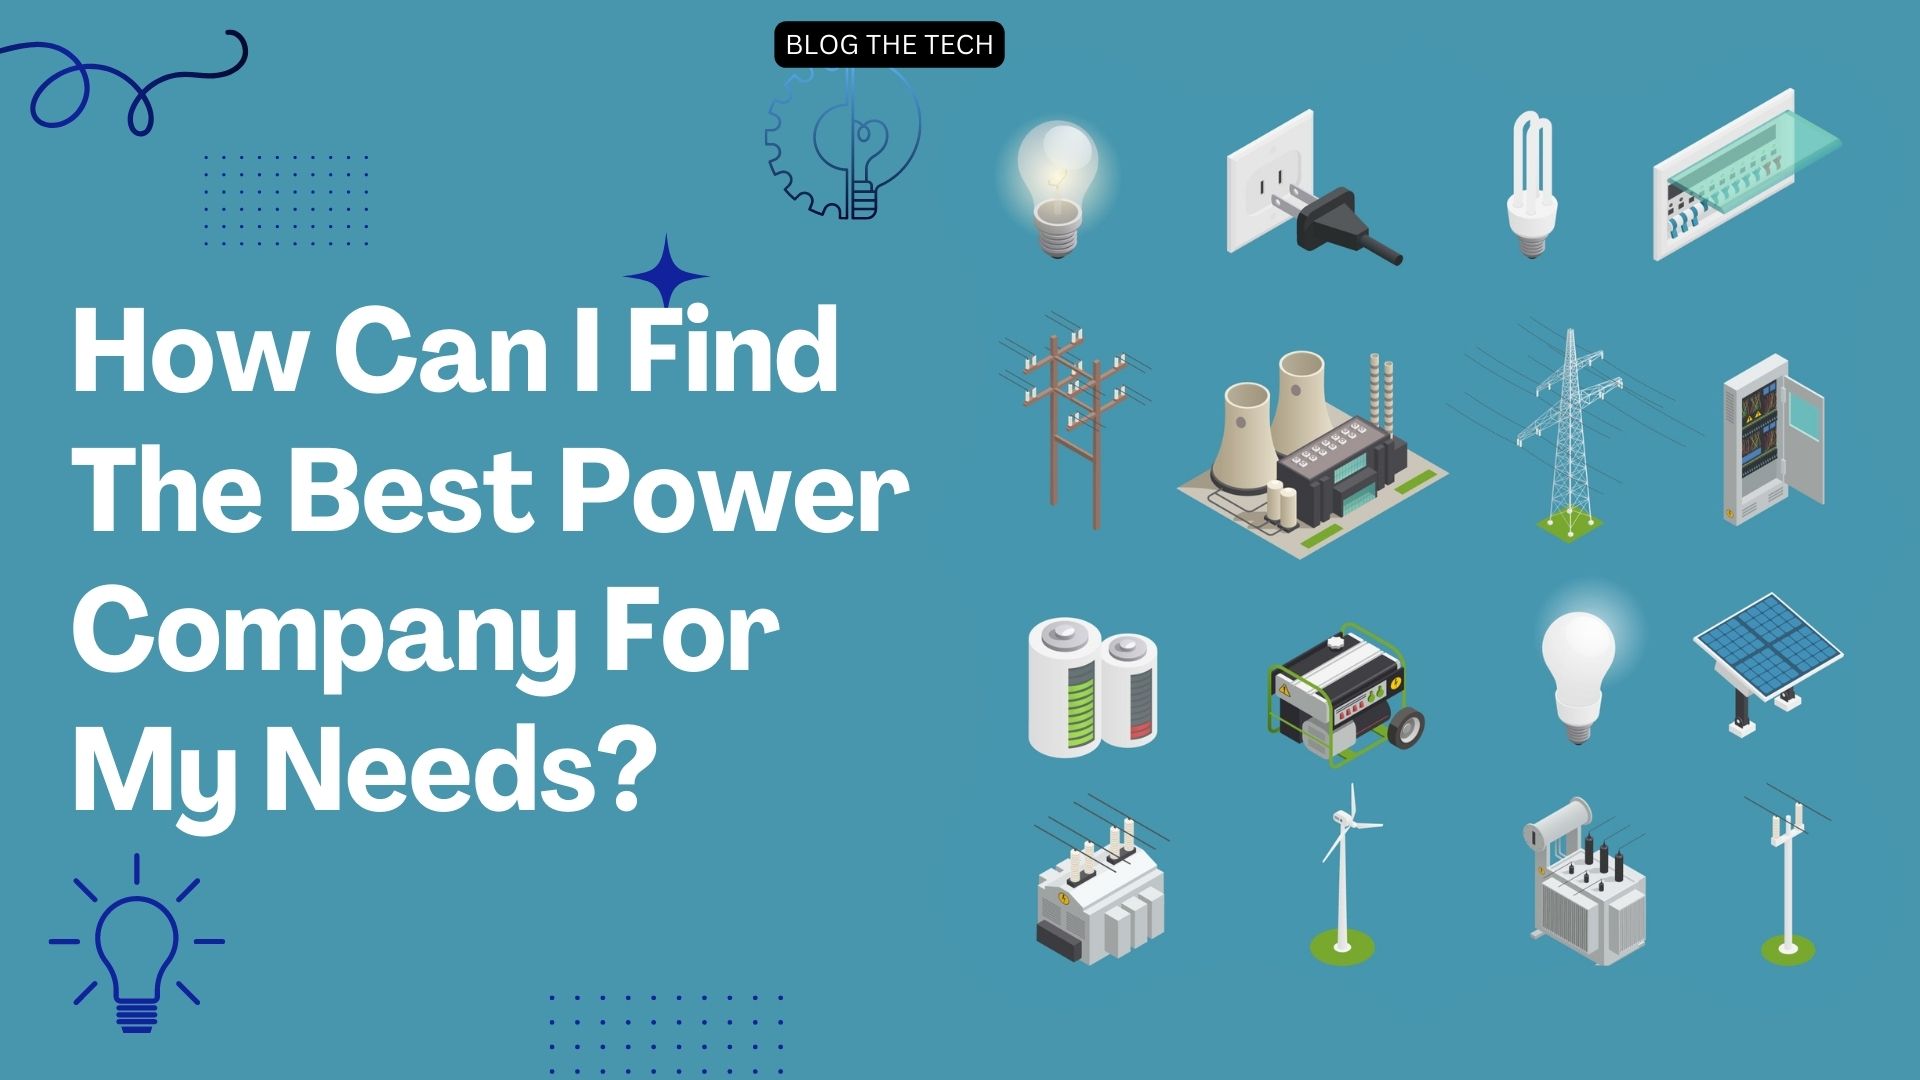 How Can I Find The Best Power Company For My Needs?